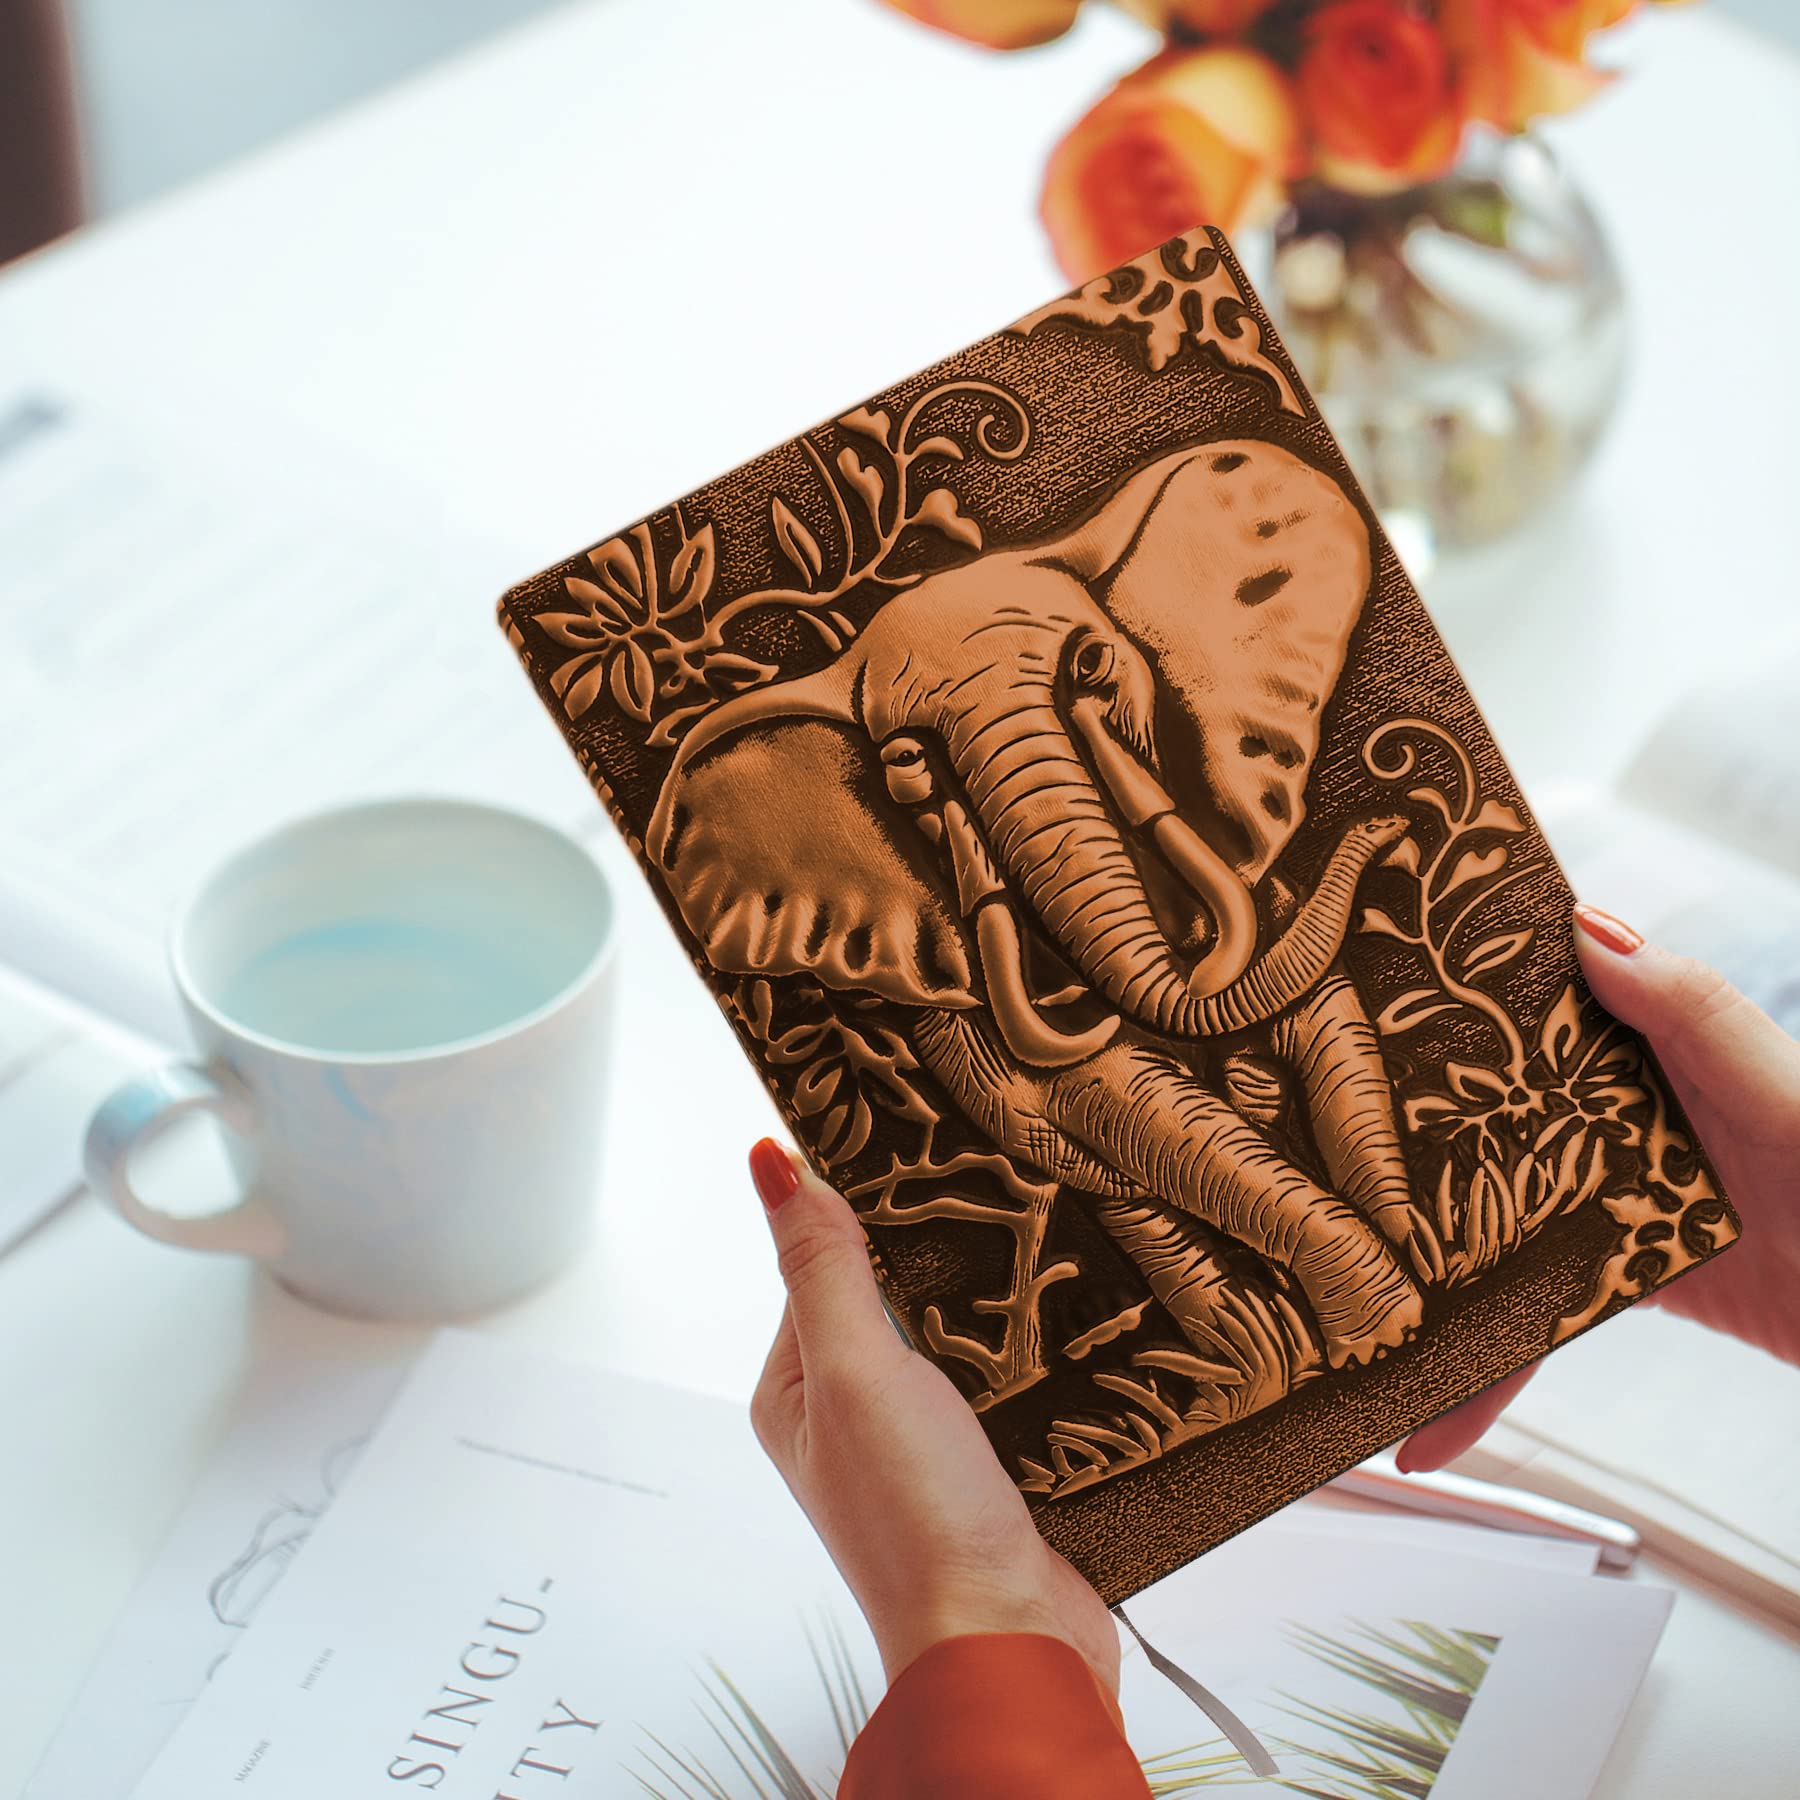 HomWanna Elephant Embossed Leather Journal Notebook - 3D Handmade Vintage Notebooks Travel Diary with Lined Paper Antique leather sketchbook Writing Journals for Women & Men (A5, Red Bronze)